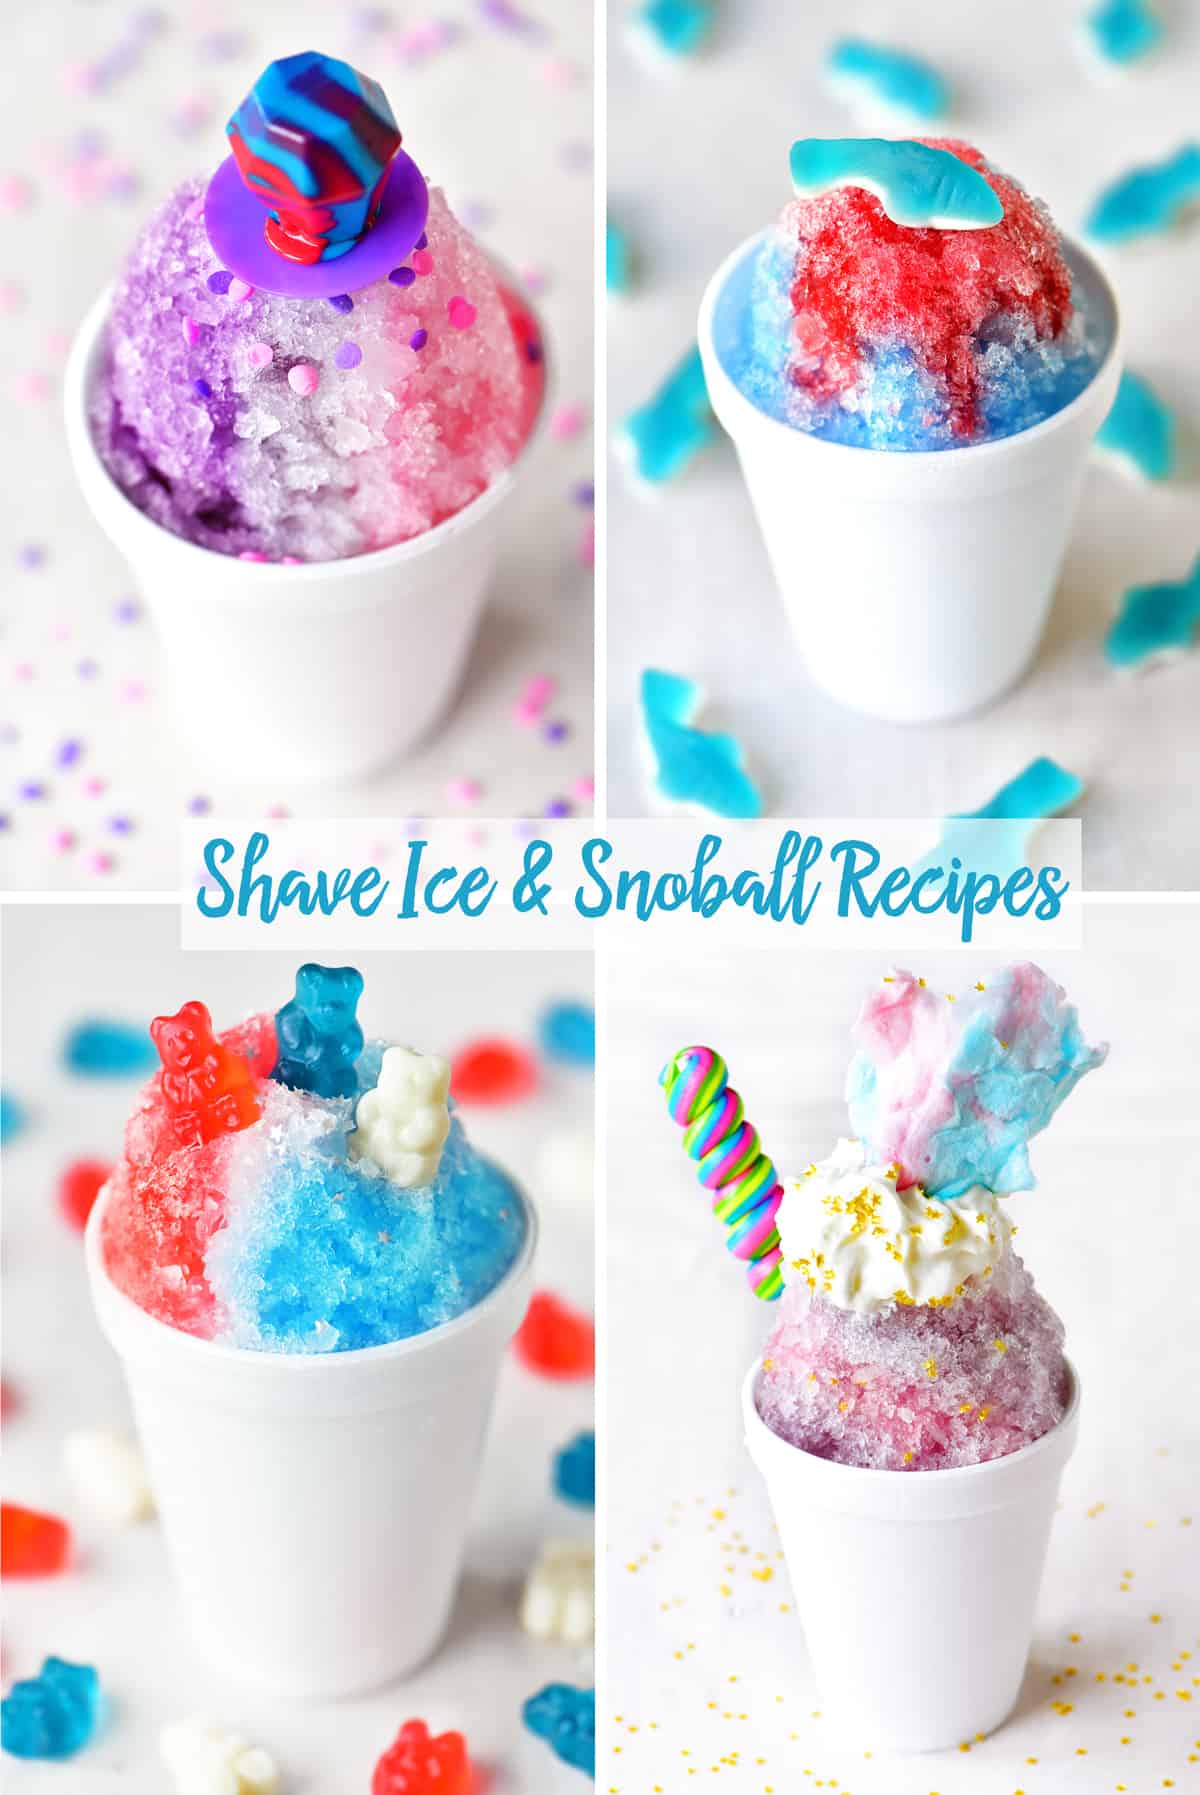 shave ice and snoballs recipes collage